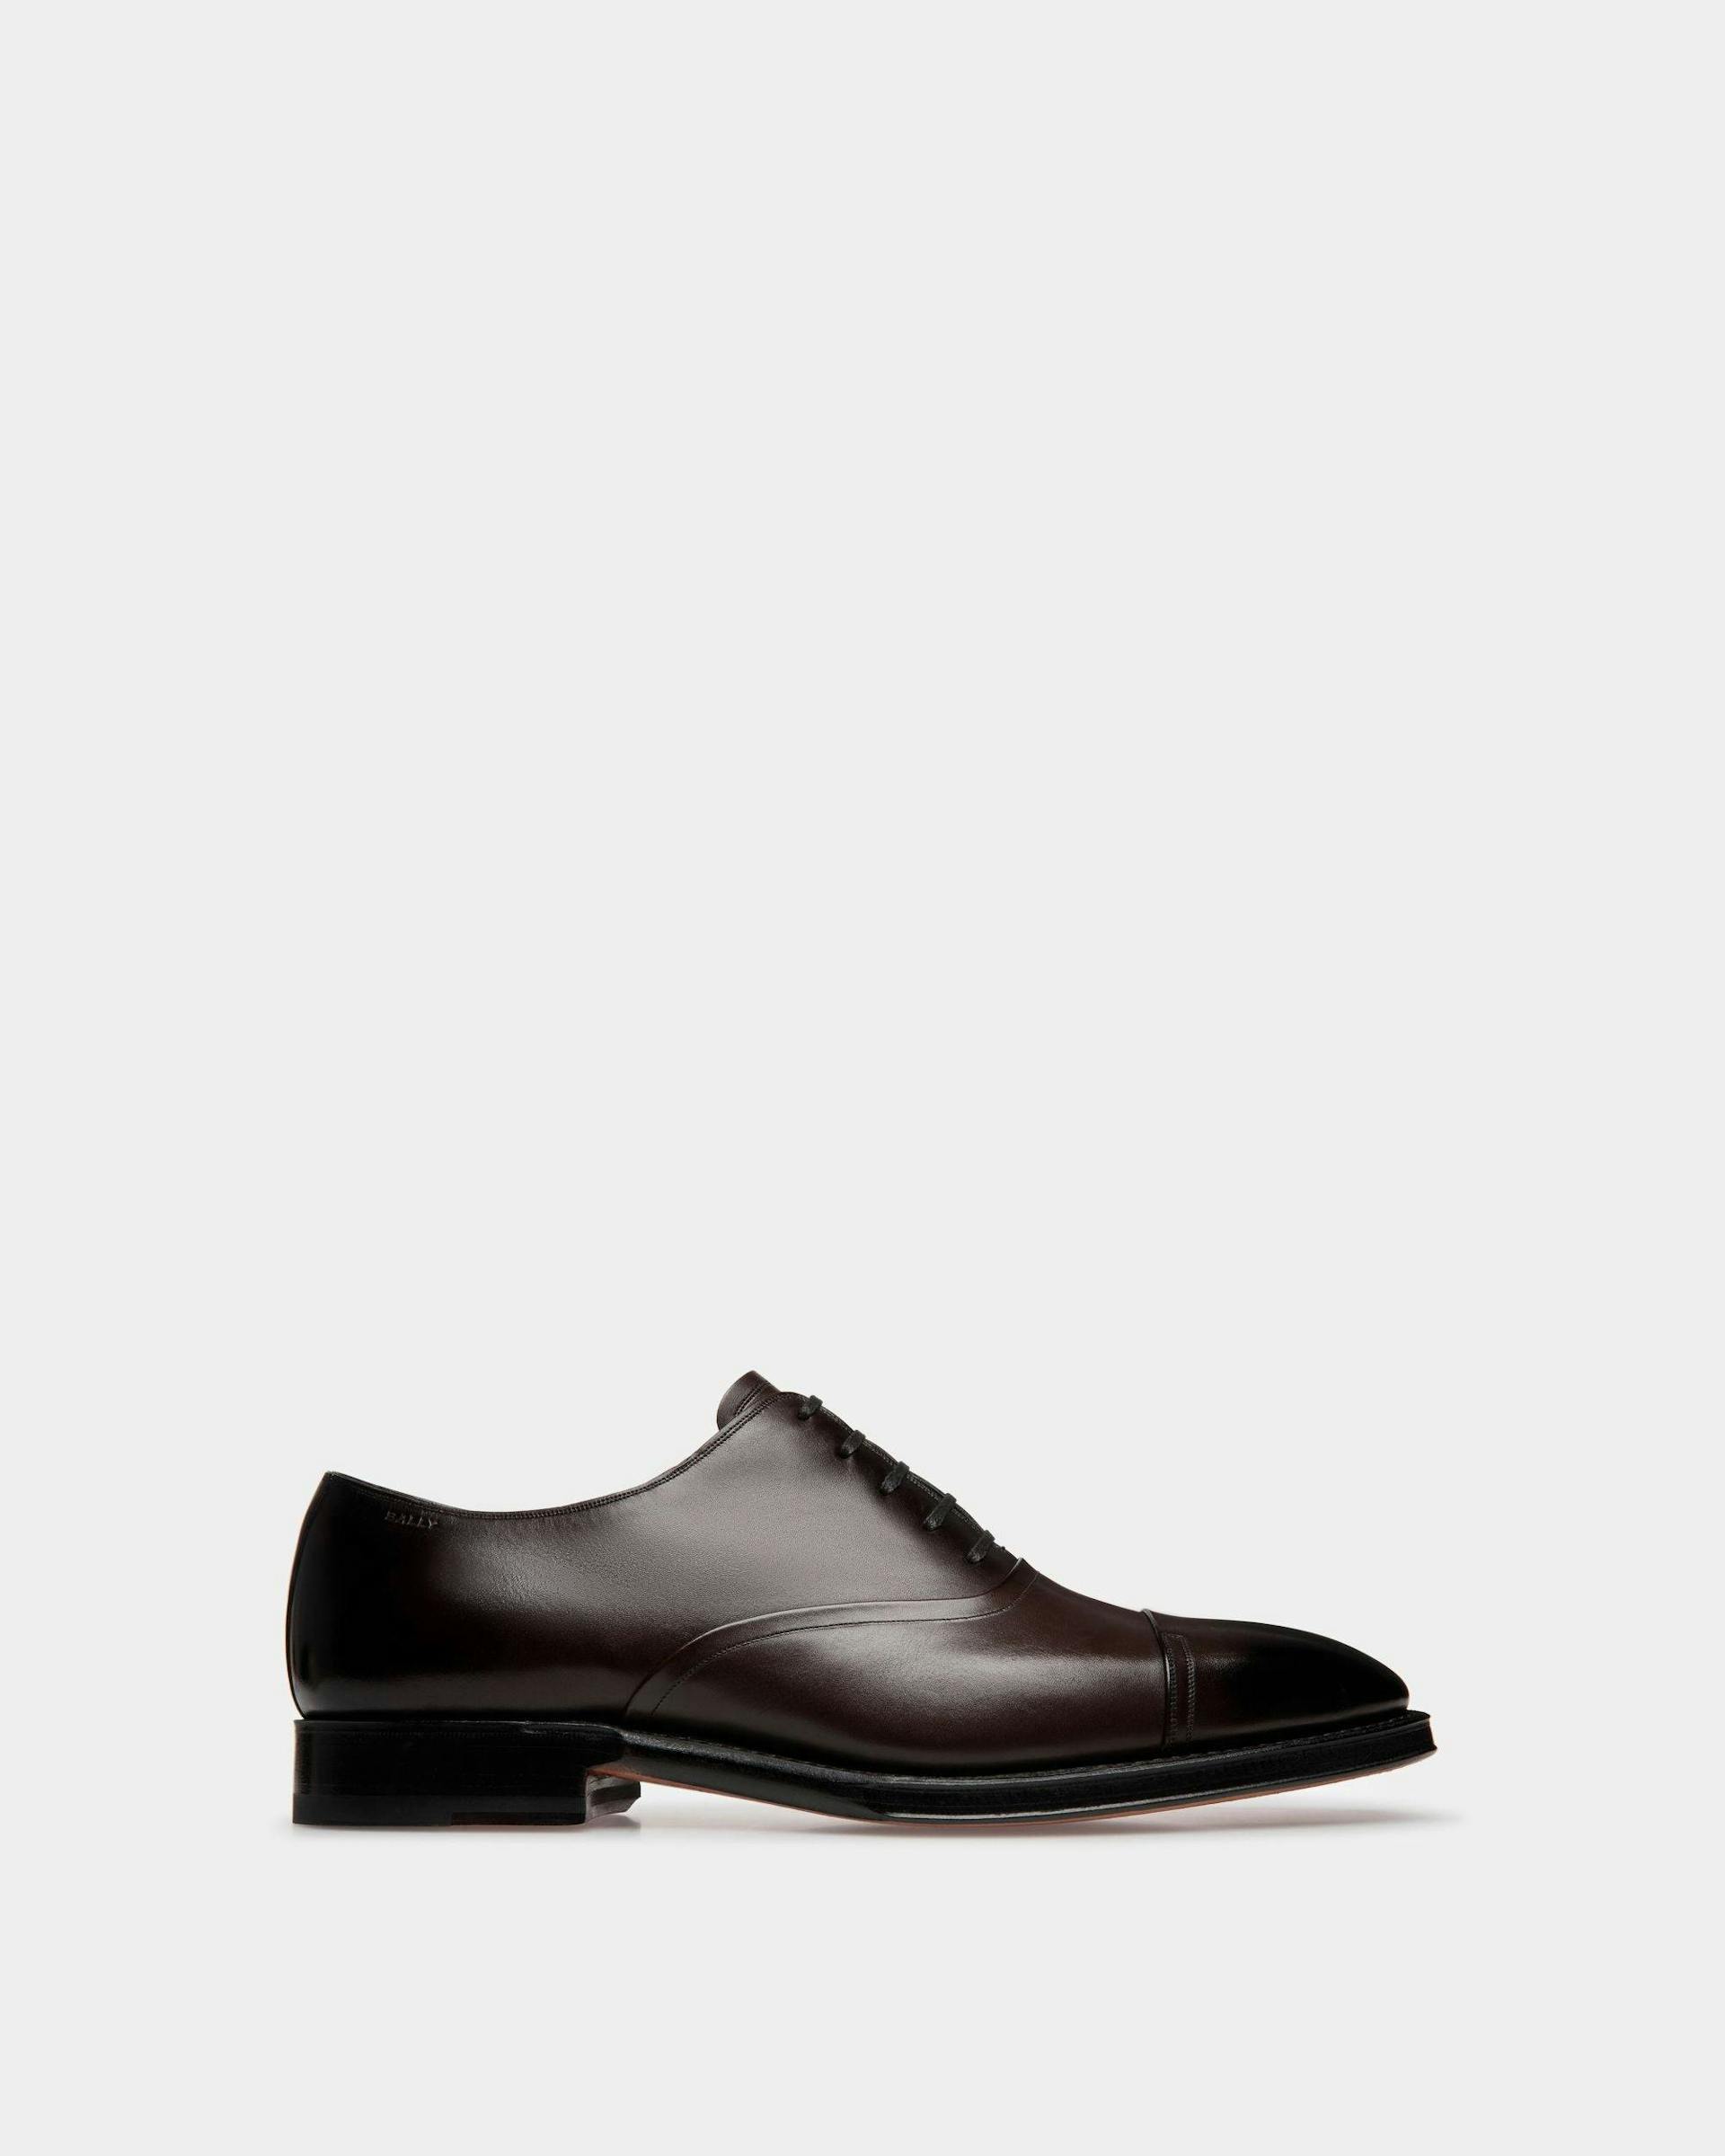 Men's Scribe Oxford Shoes In Brown Leather | Bally | Still Life Side